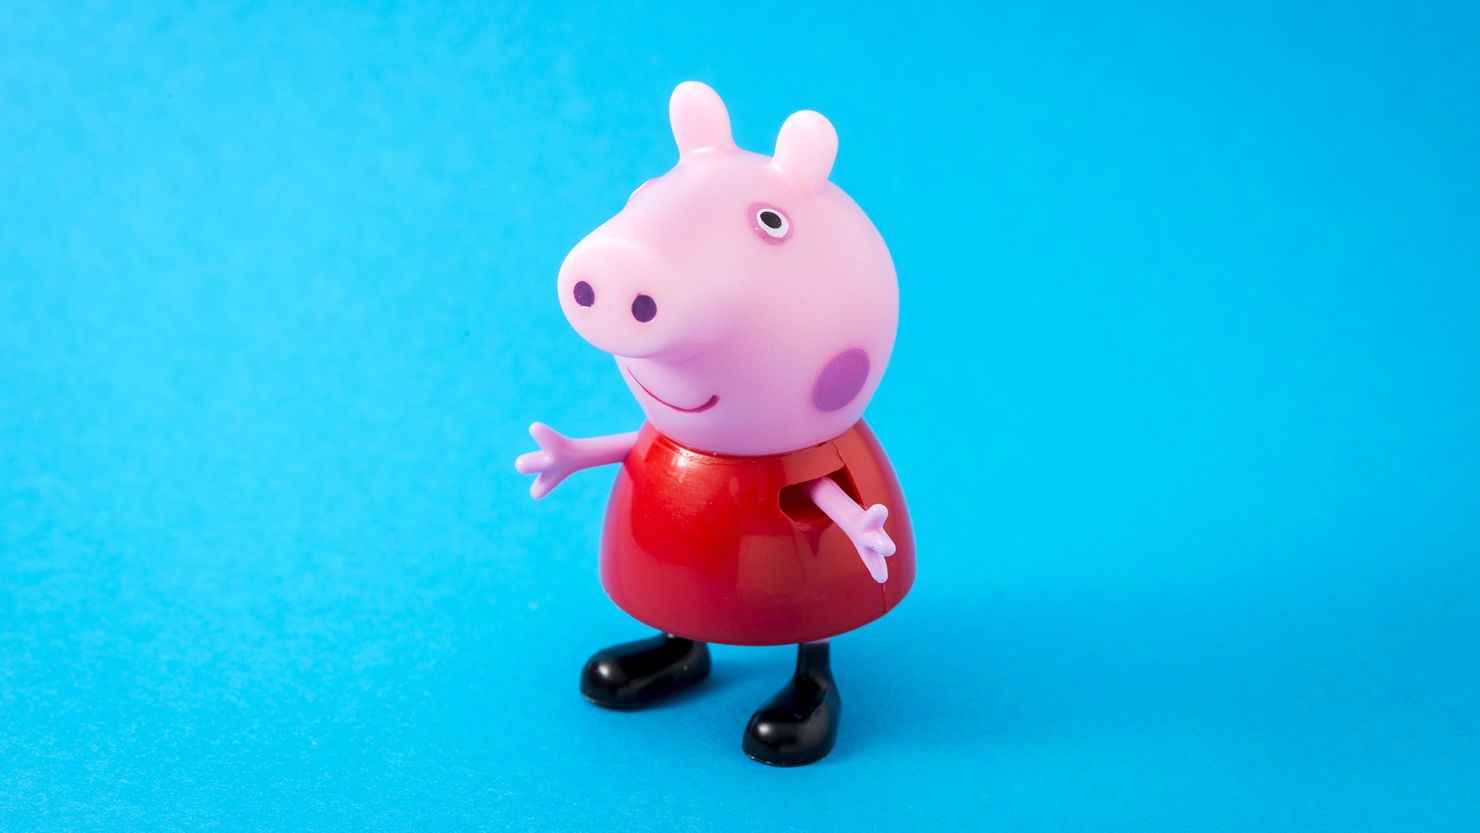 Children's cartoon character Peppa Pig has come under fire from China's censors.